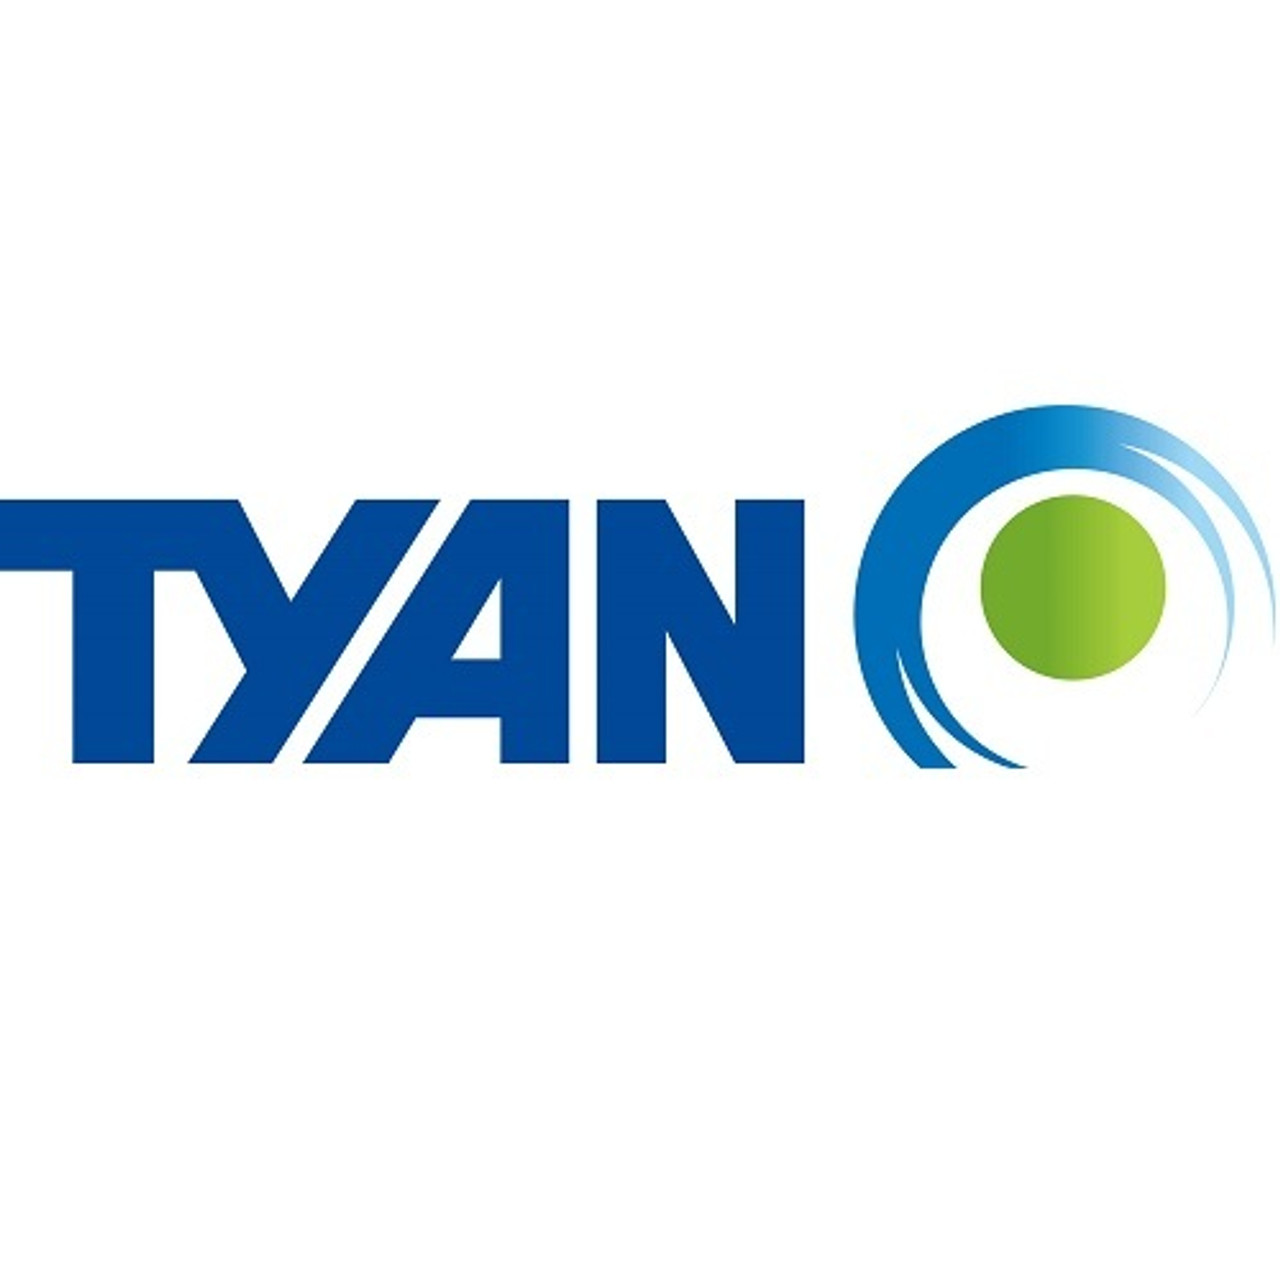 Tyan Intel Xeon SP based 8 GPU server with high CPU to GPU bandwidth for cryptography, particle physics, genetic algorithm, and other embarrassingly parallel workloads NVME Support